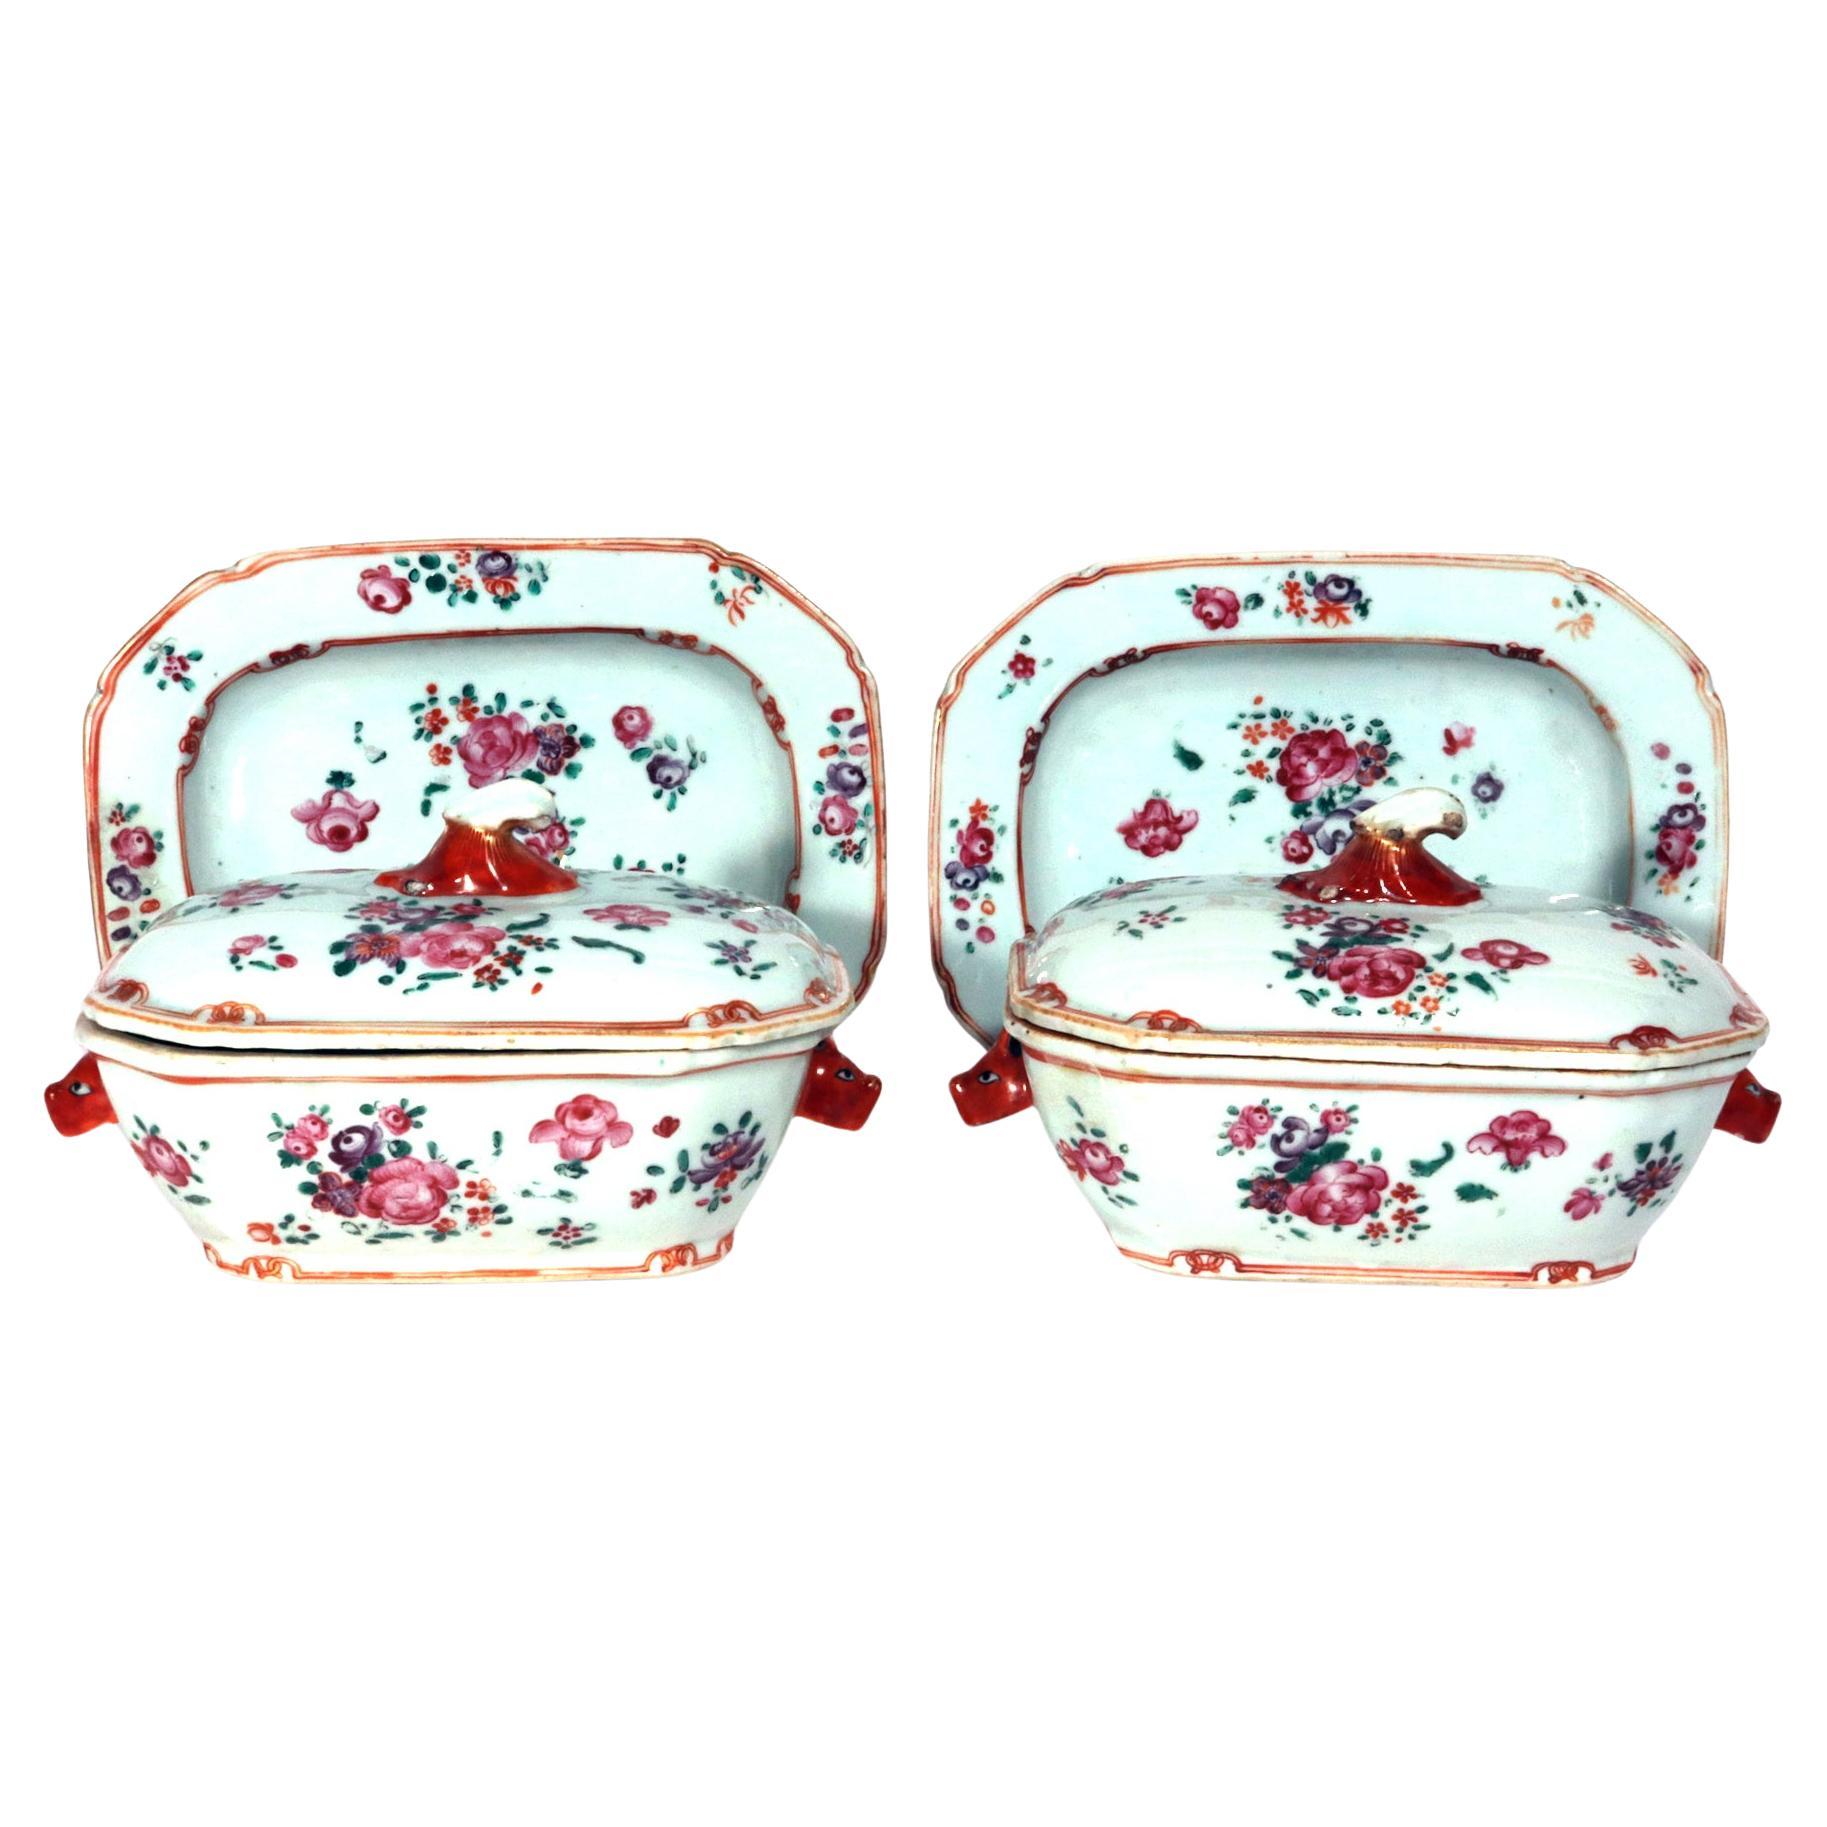 Chinese Export Porcelain Famille Rose Sauce Tureens, Covers & Stands For Sale